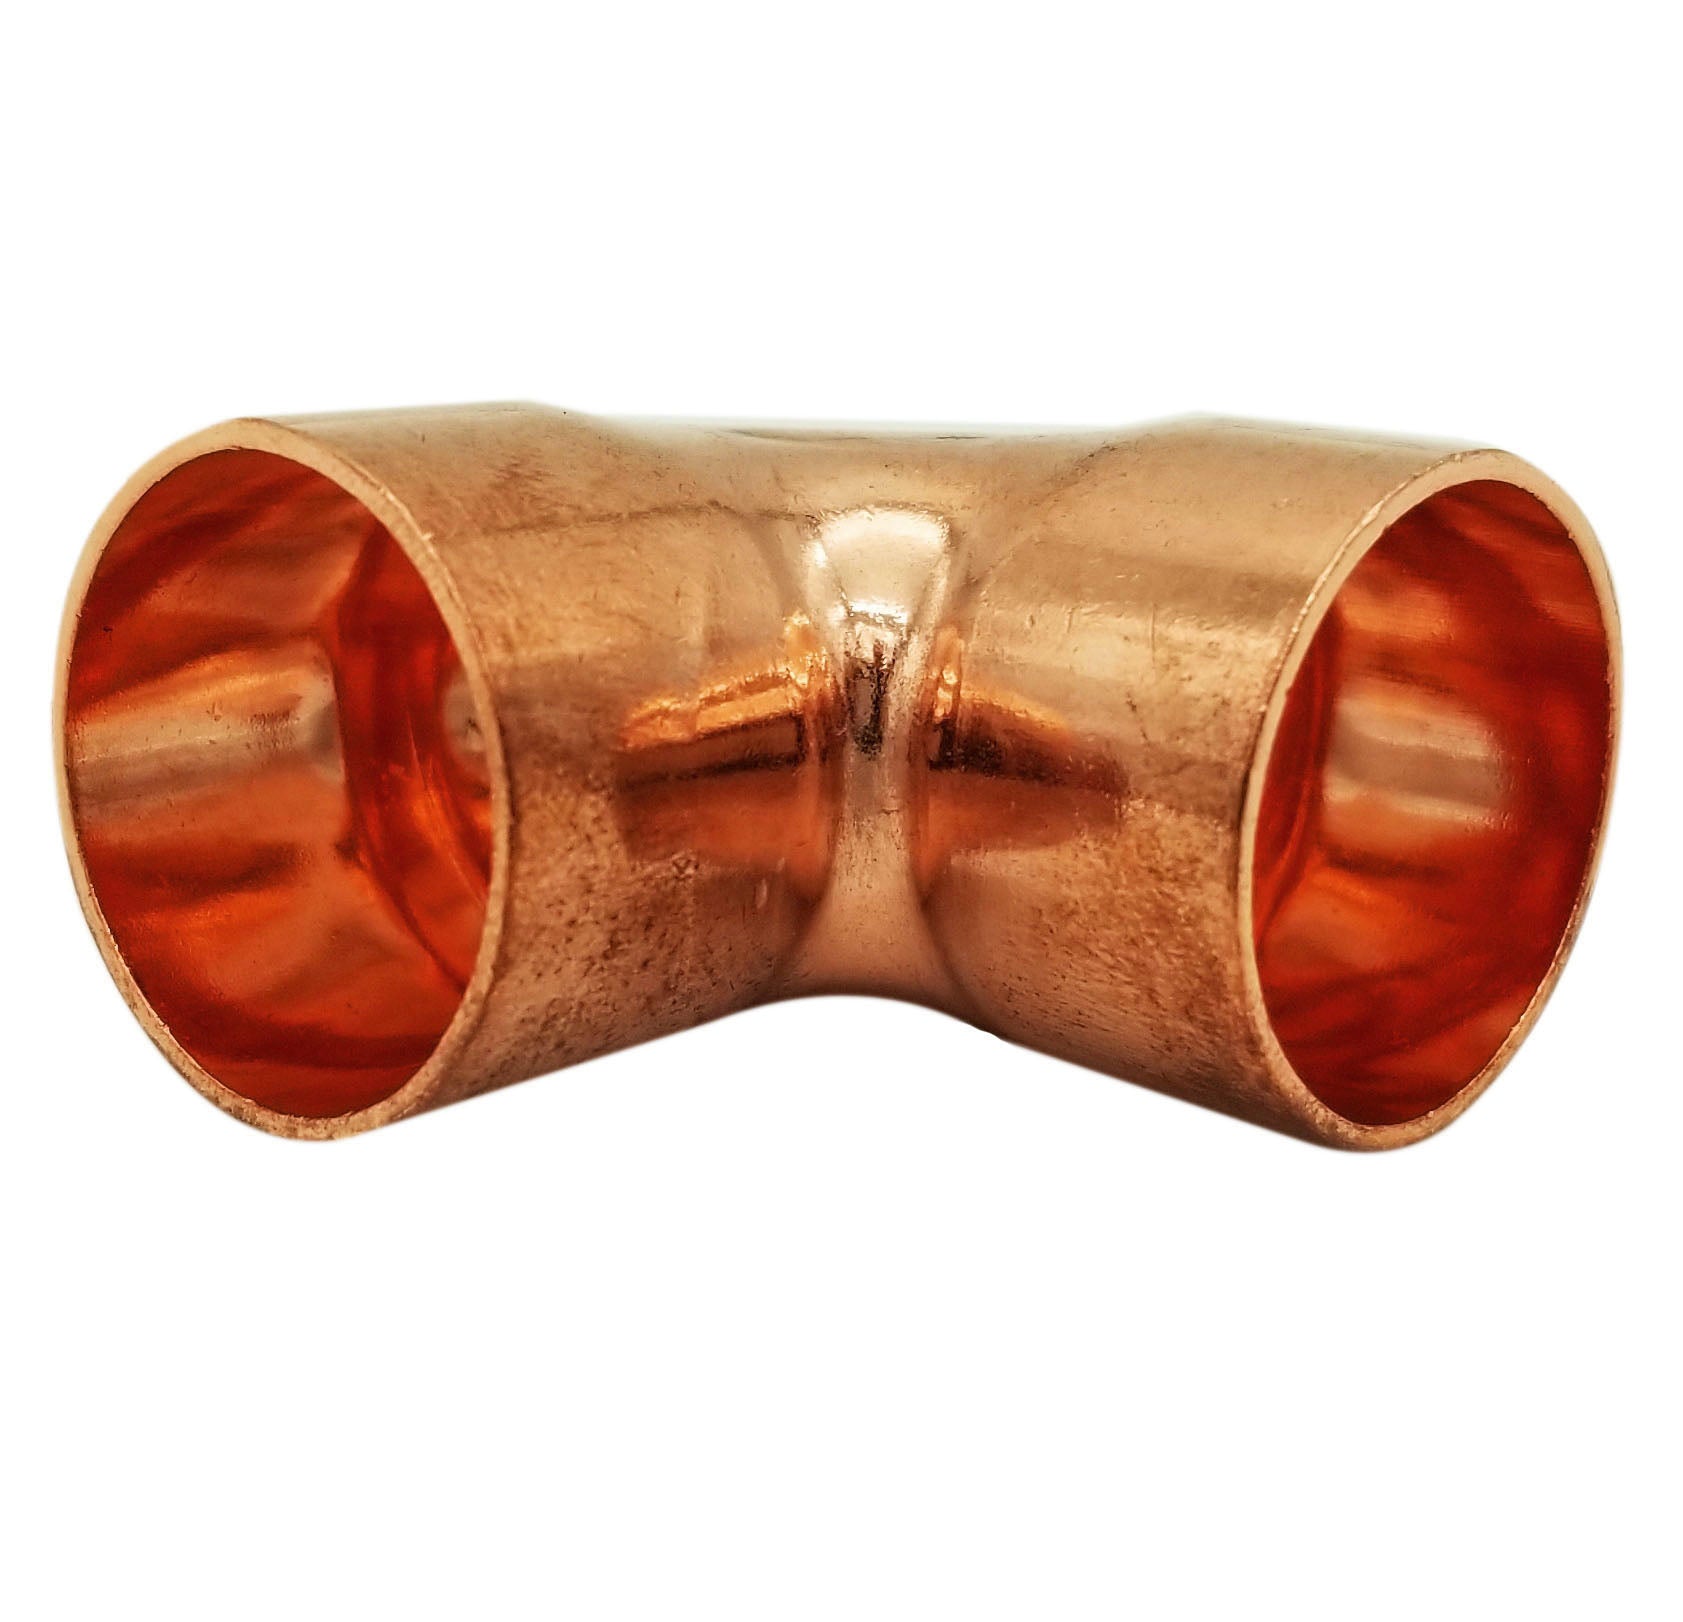 Copper Fitting 1-1/8 Inch (HVAC Outer Dimension) 1 Inch (Plumbing Inner Dimension) - 45 Degree Copper Pressure Elbow For Plumbing & HVAC – 99.9% Pure Copper - 5 Pack